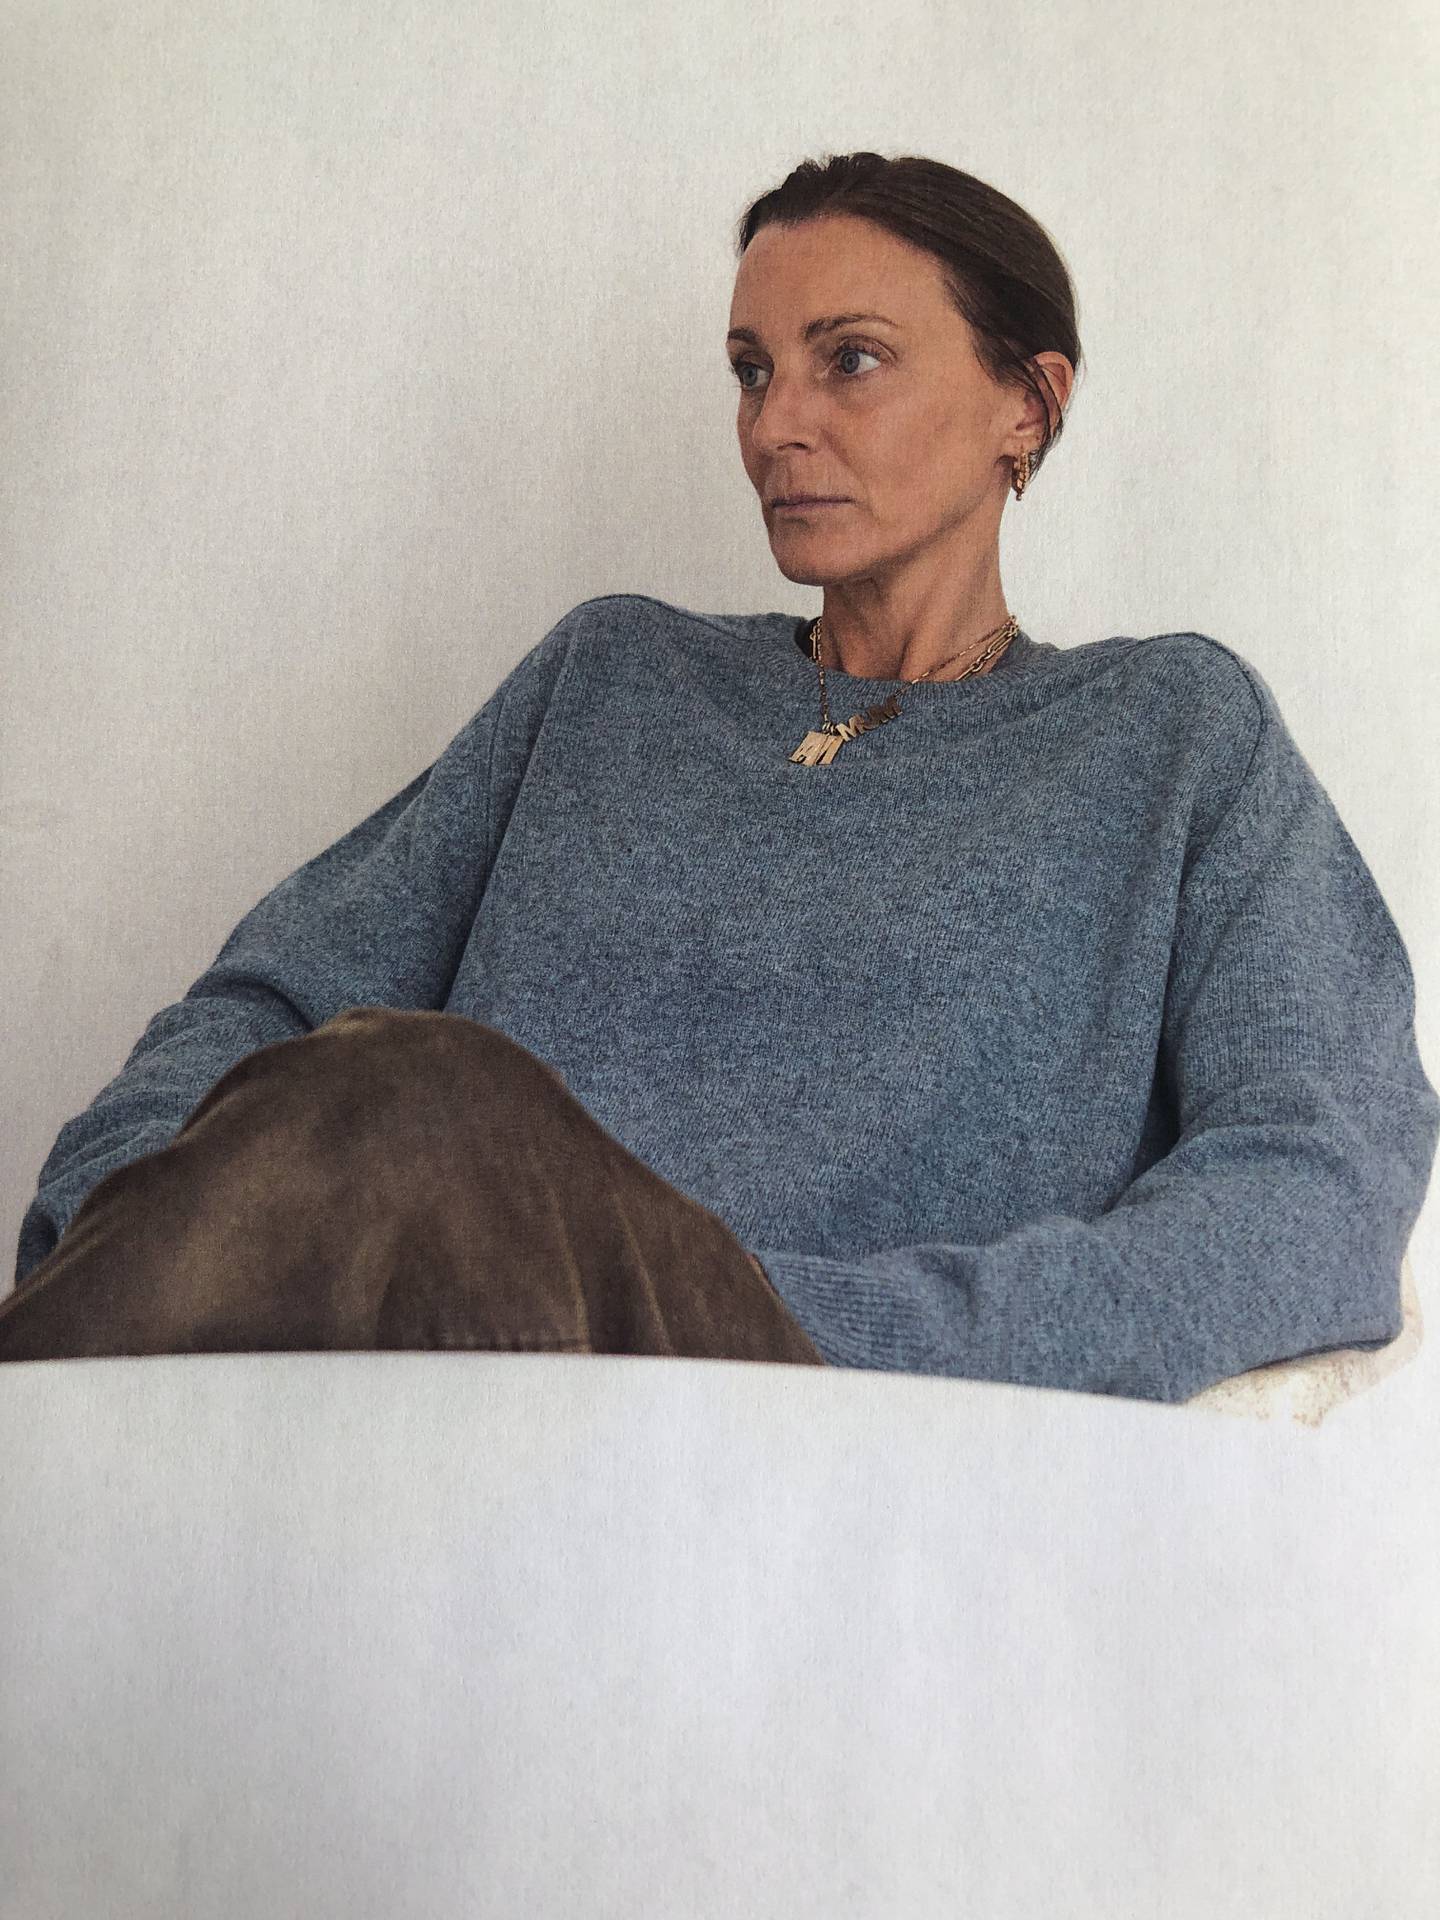 Phoebe Philo will make her return to fashion with a namesake brand.